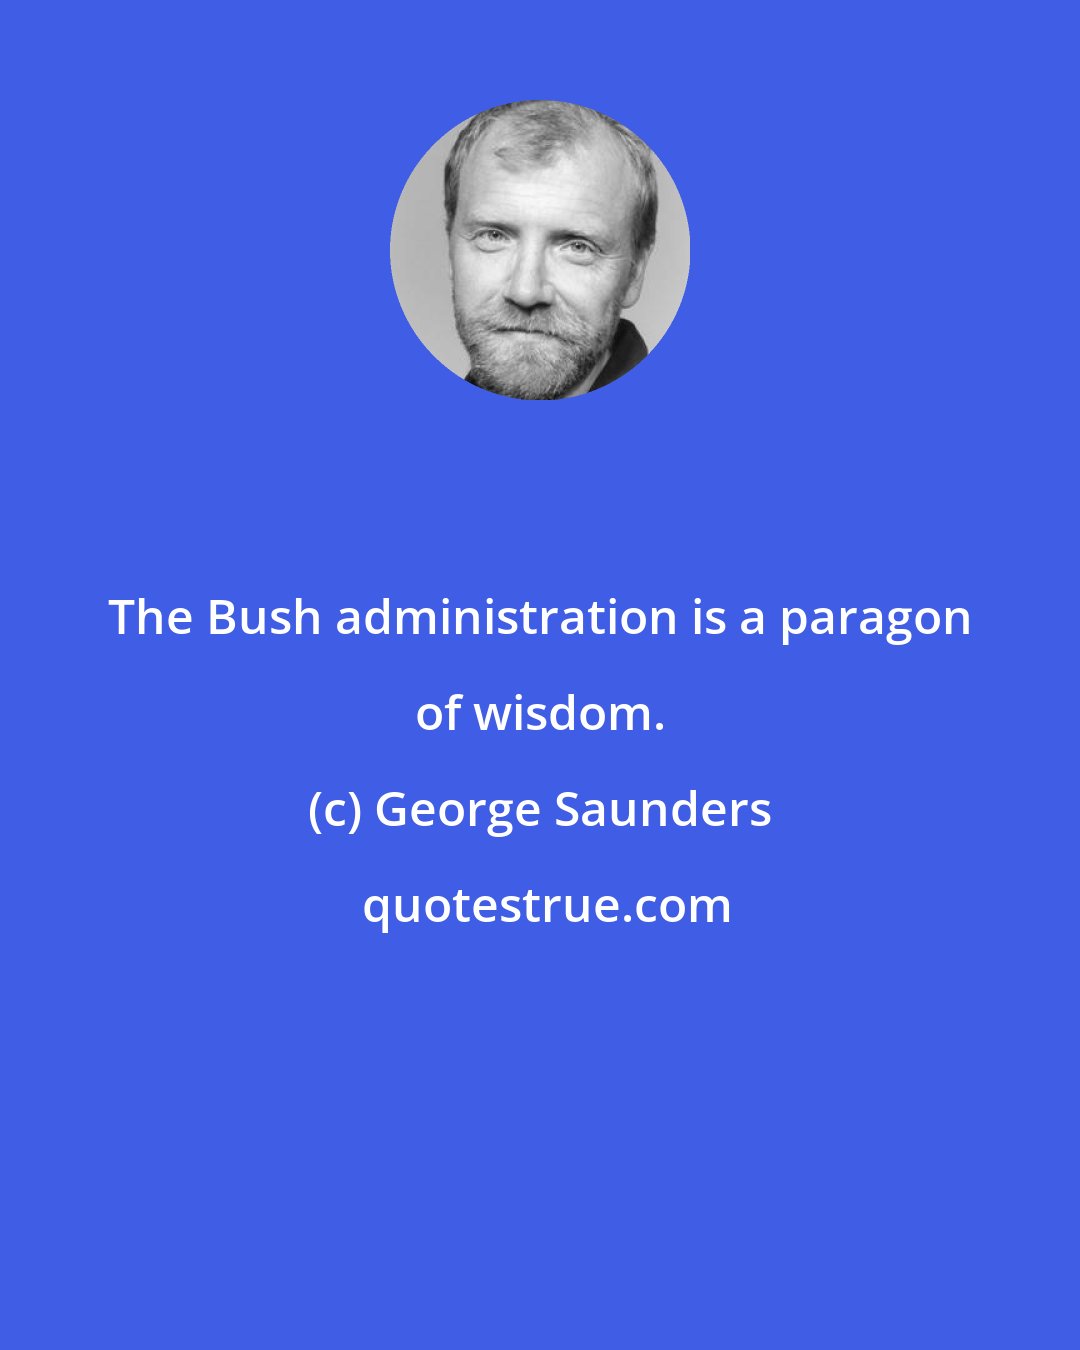 George Saunders: The Bush administration is a paragon of wisdom.